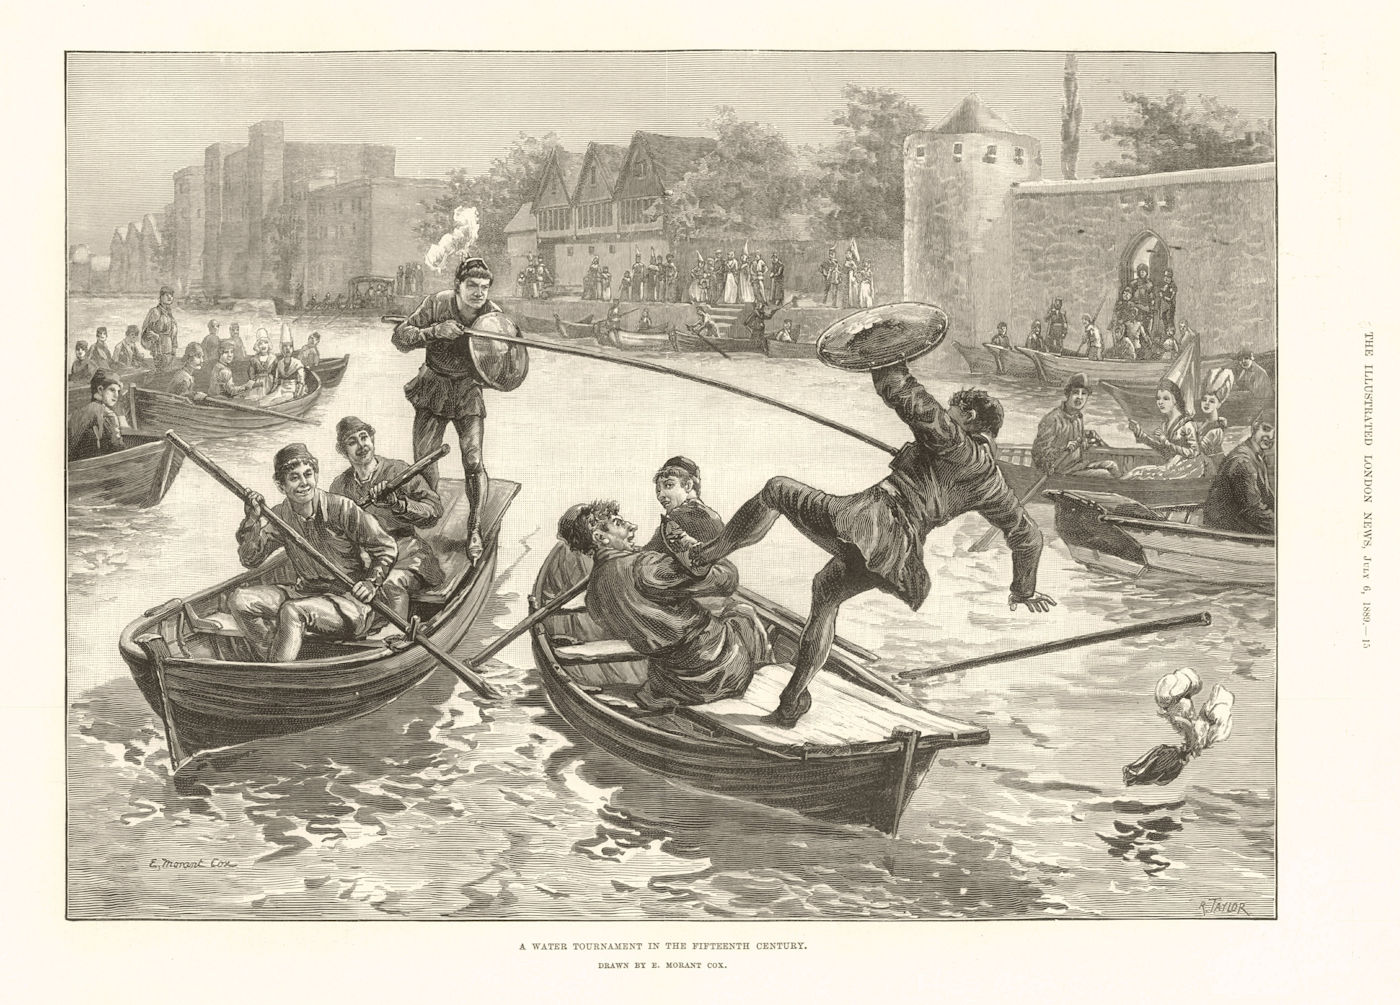 A water tournament in the fifteenth century. Boats. Jousting 1889 old print